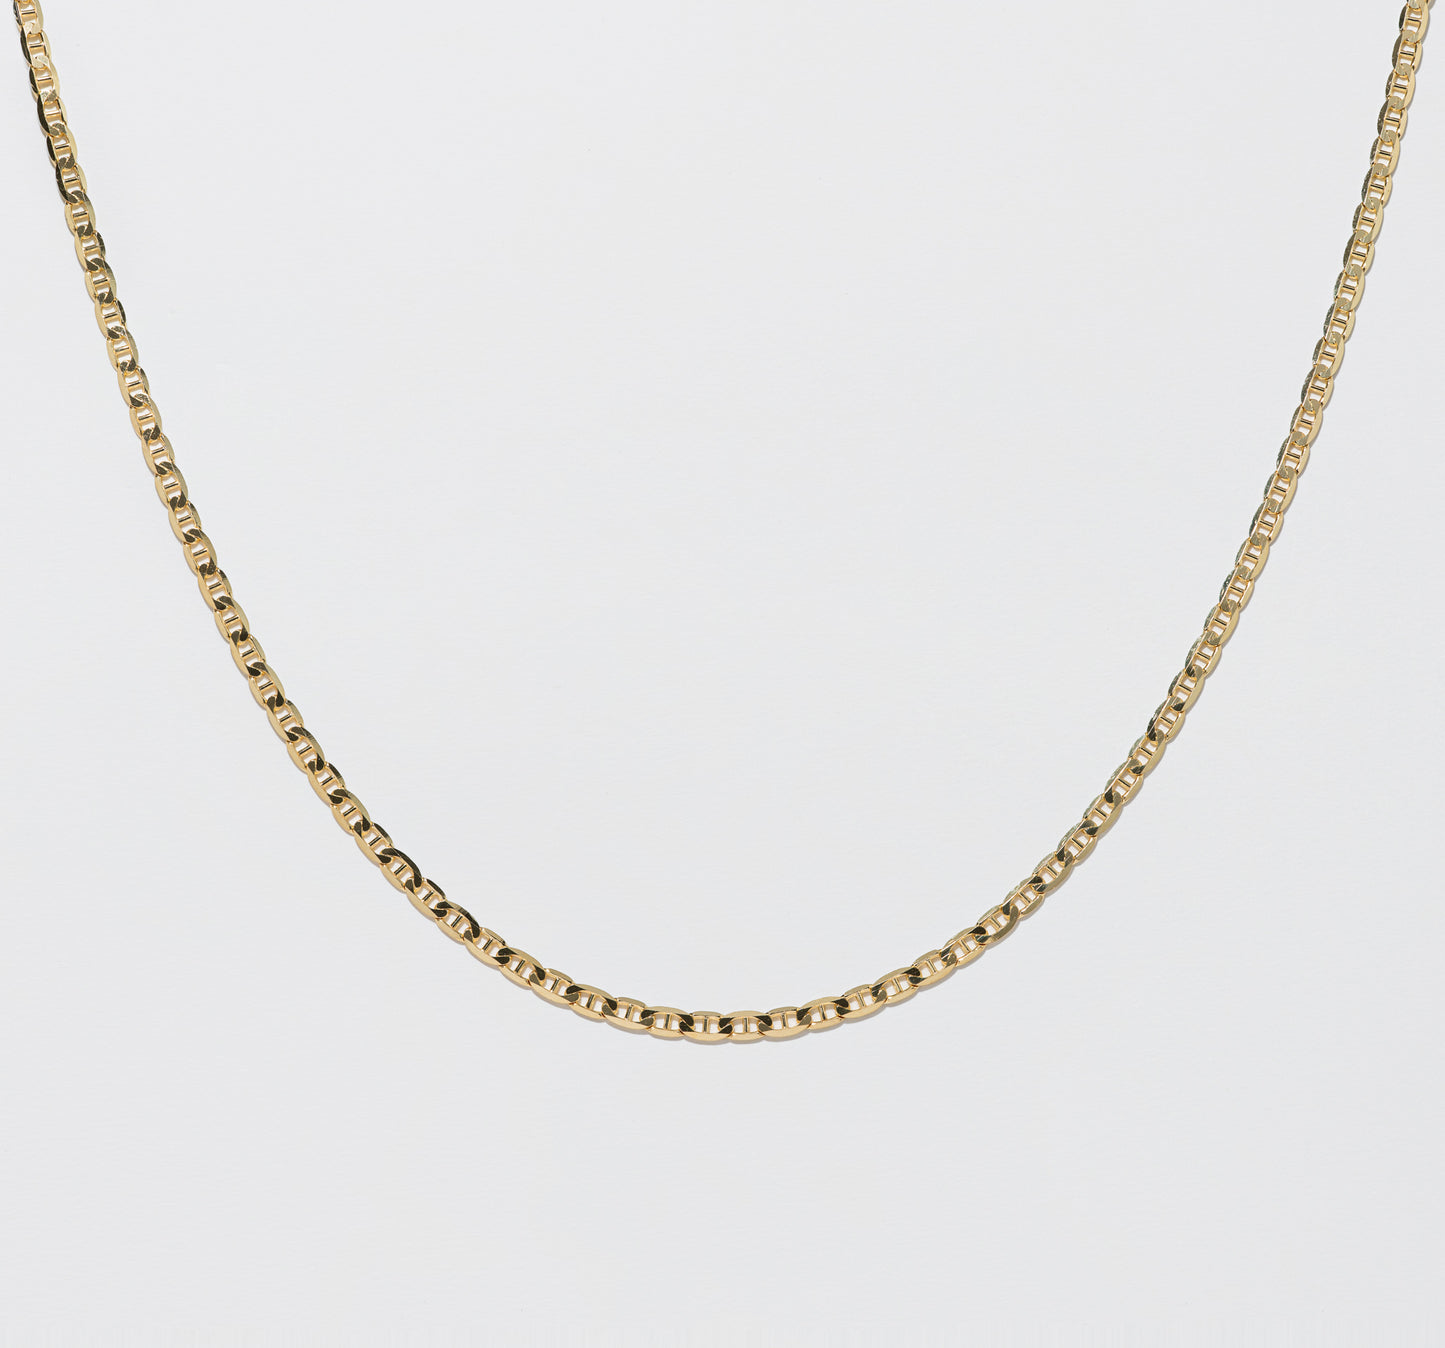 Yellow Gold Curbed Anchor Chain - Polished 4.5mm